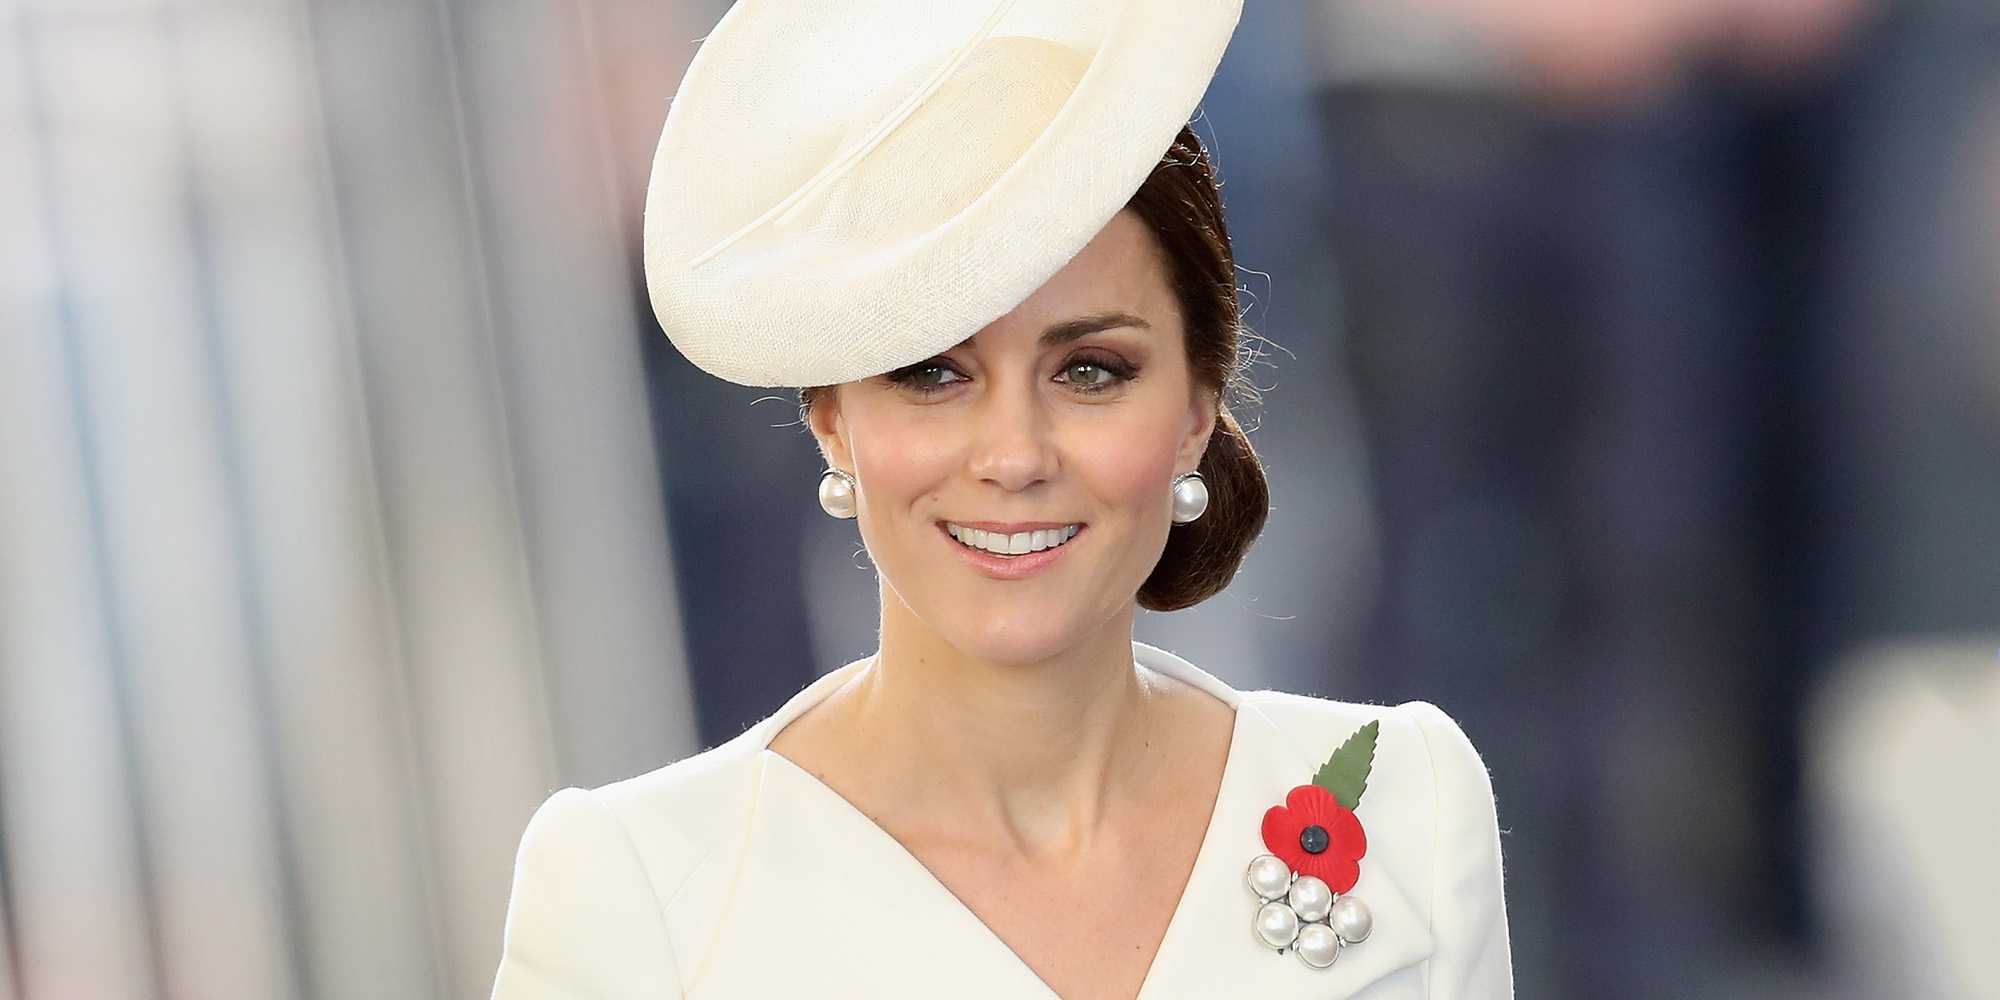 Kate Middleton makes her first public appearance since announcing her pregnancy